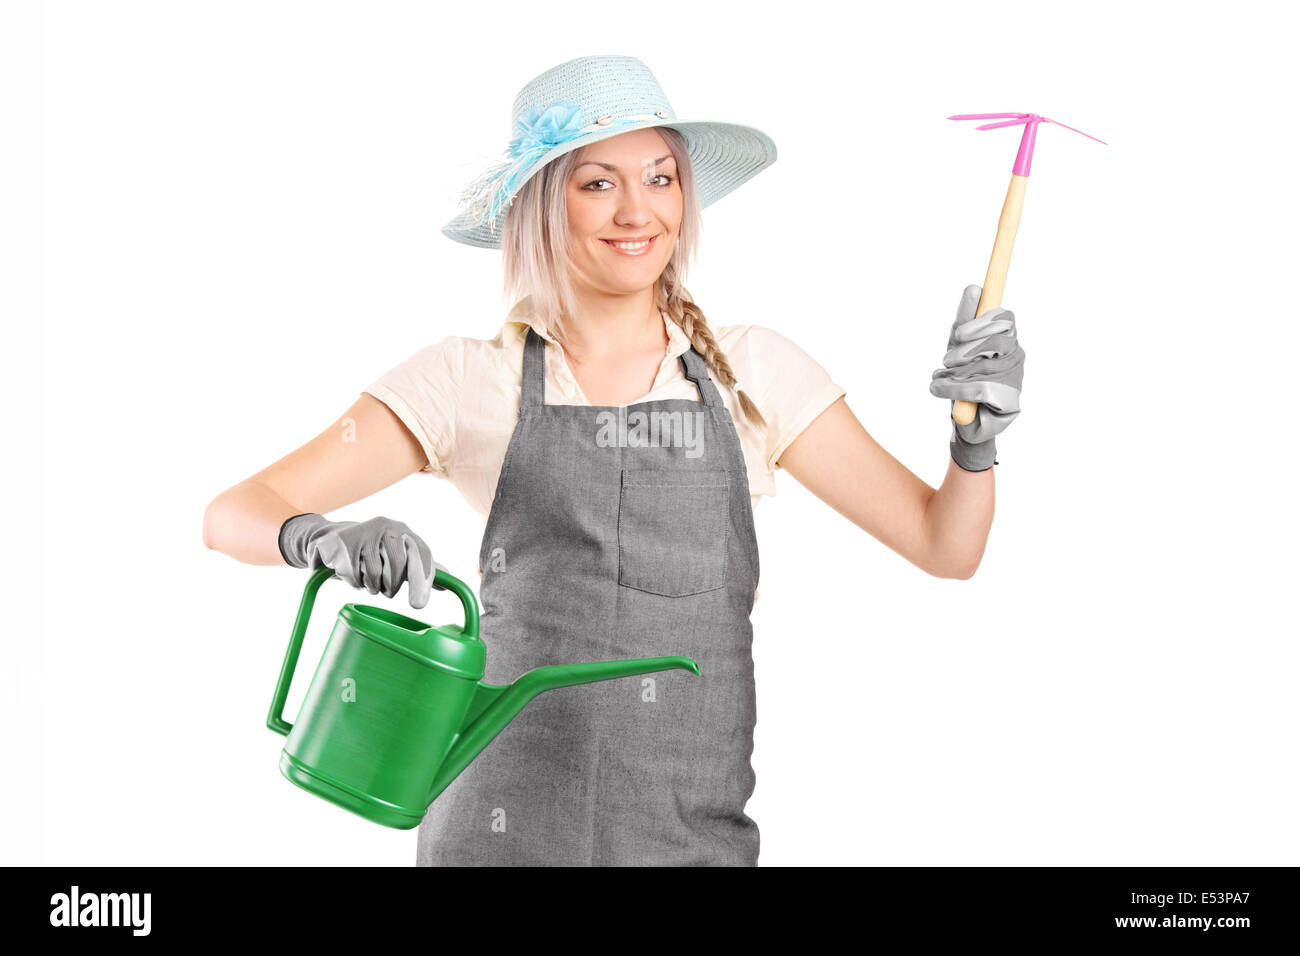 Female gardener holding mattock and watering can Stock Photo